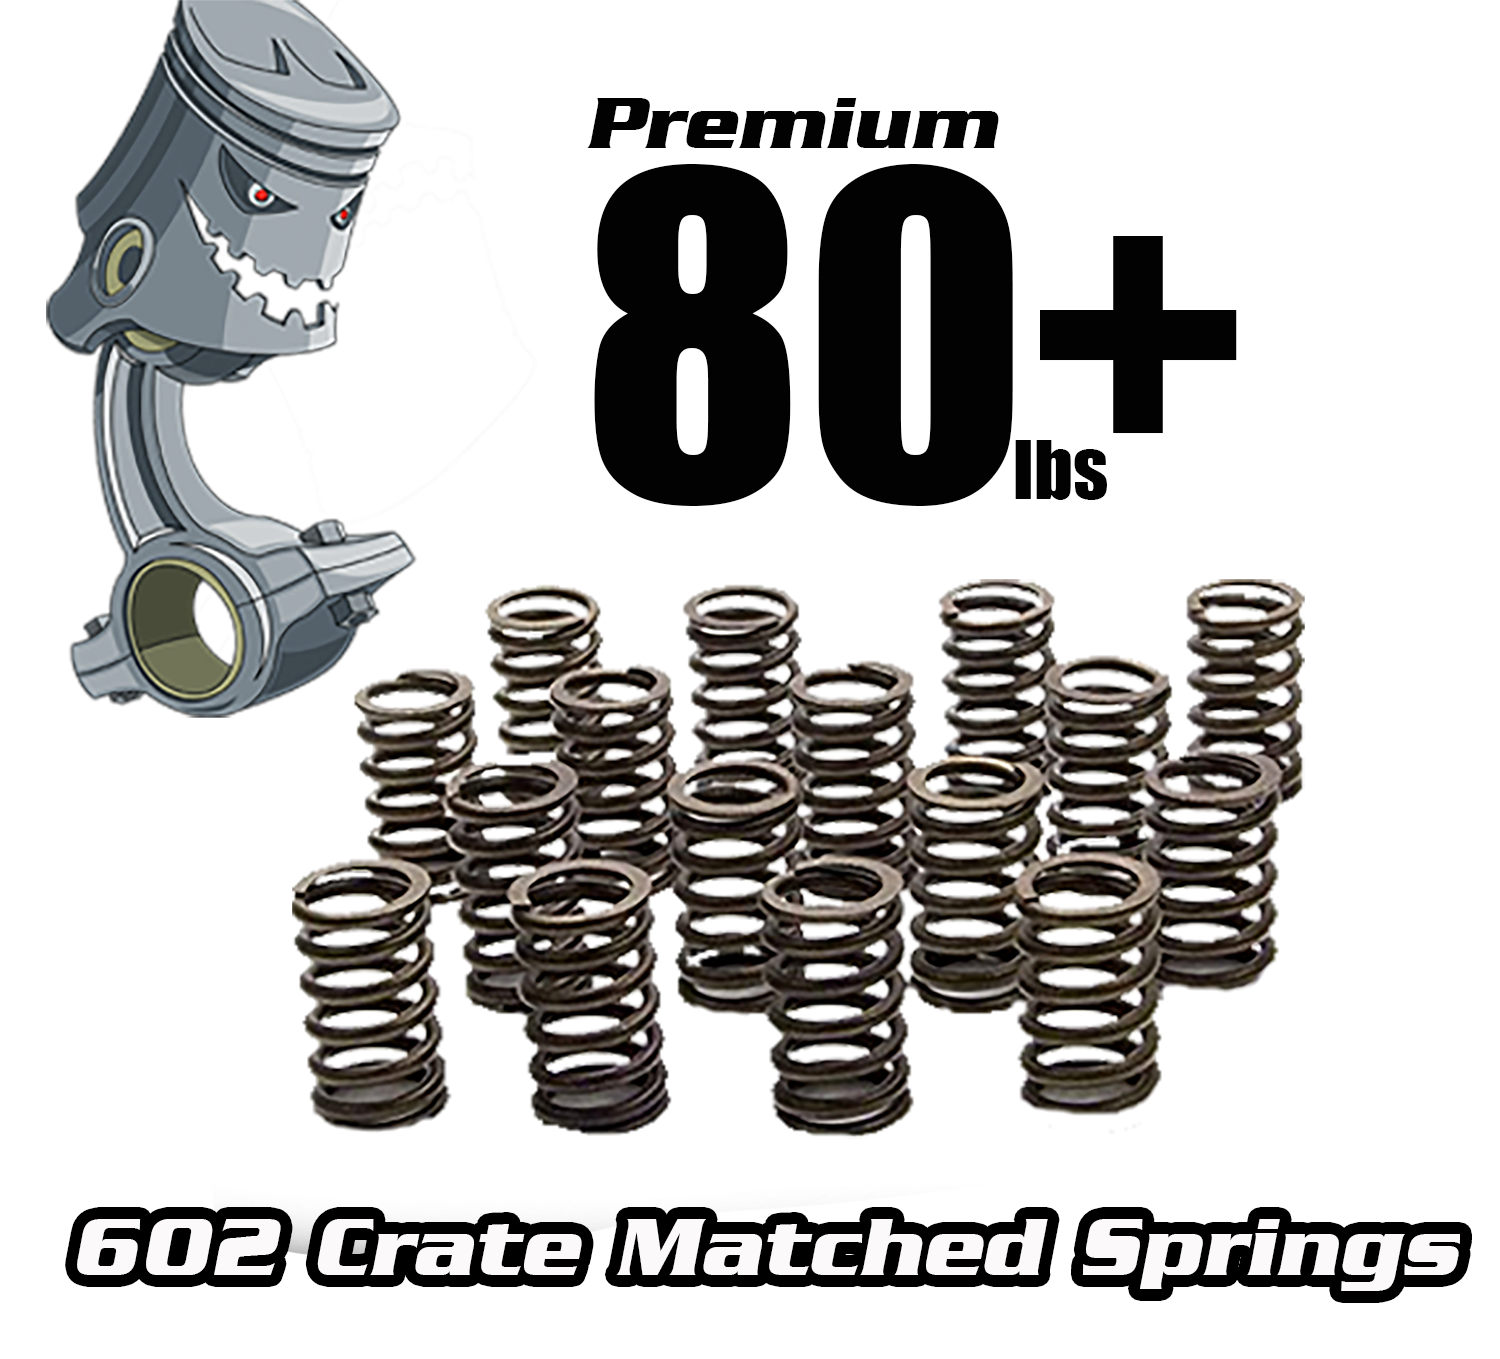 Premium 80lb and 81lb Matched Valve Springs for 602 Crate